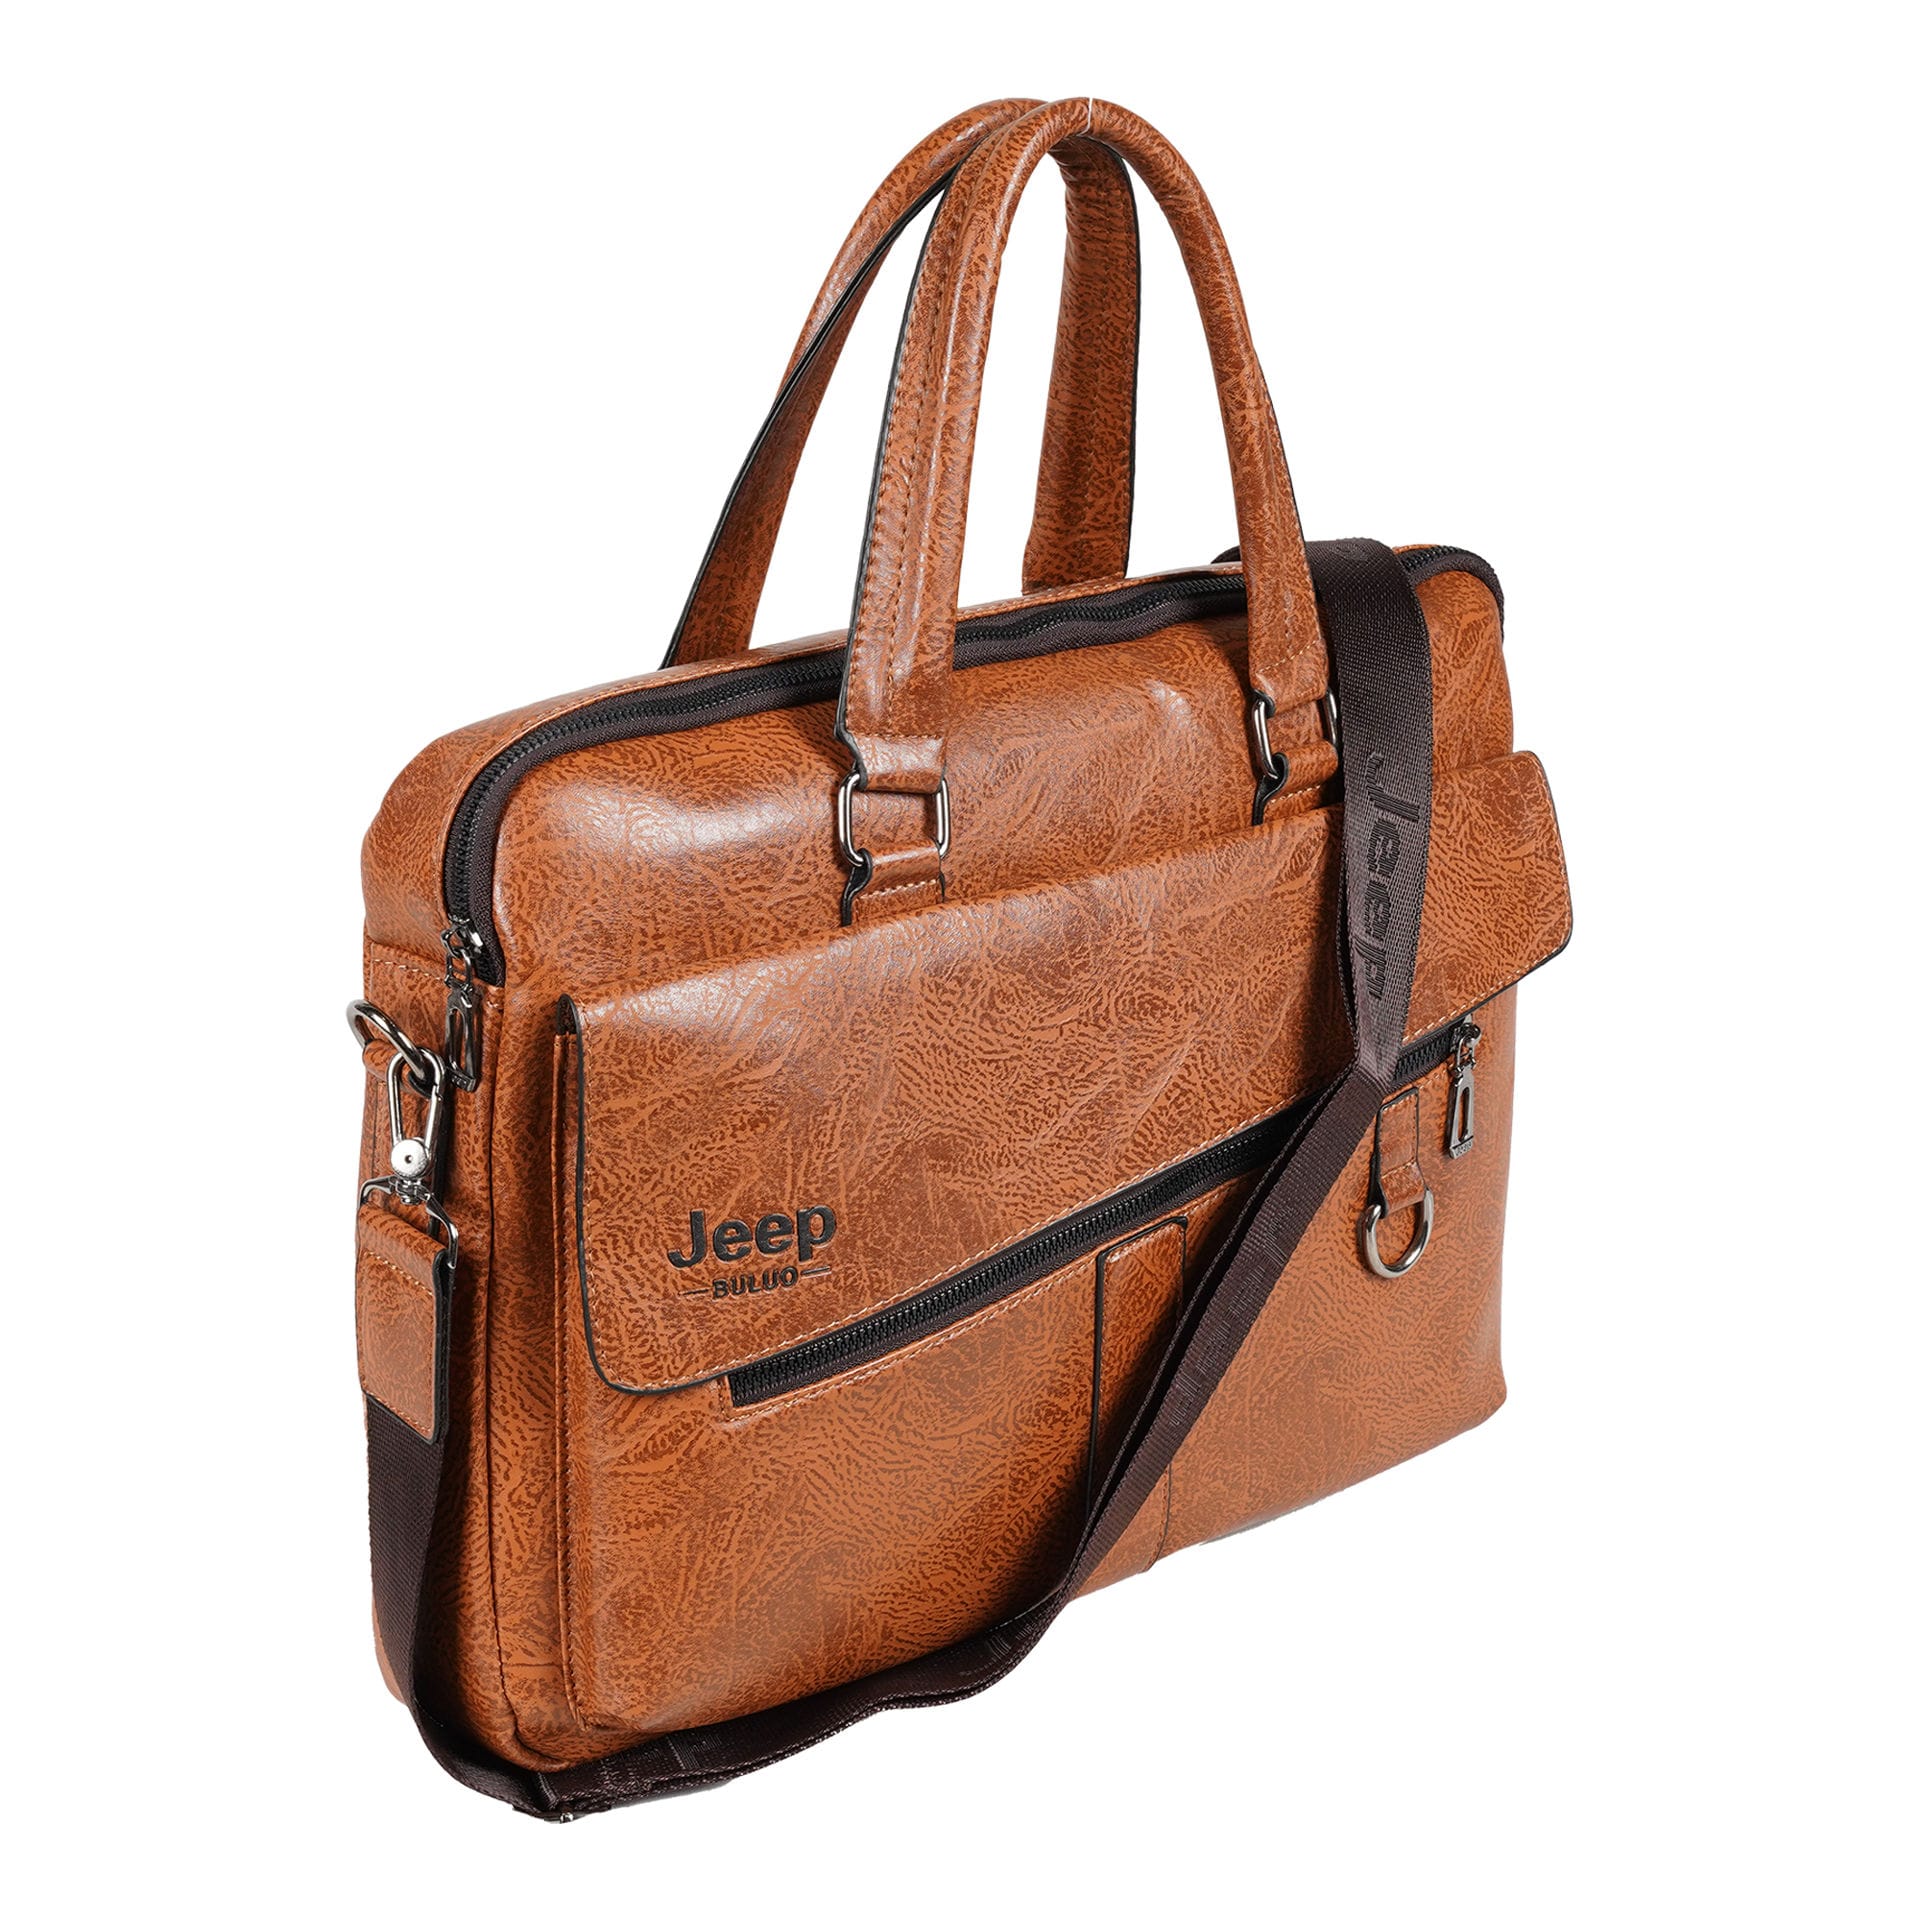 24 7 FASHION Jeep Business Bag - One Shoulder Handbag Crossbody Briefcase  made of High-Quality PU Leather for Professionals - Messenger Shoulder Bag  perfect for Daily Commute and Business Needs for men @